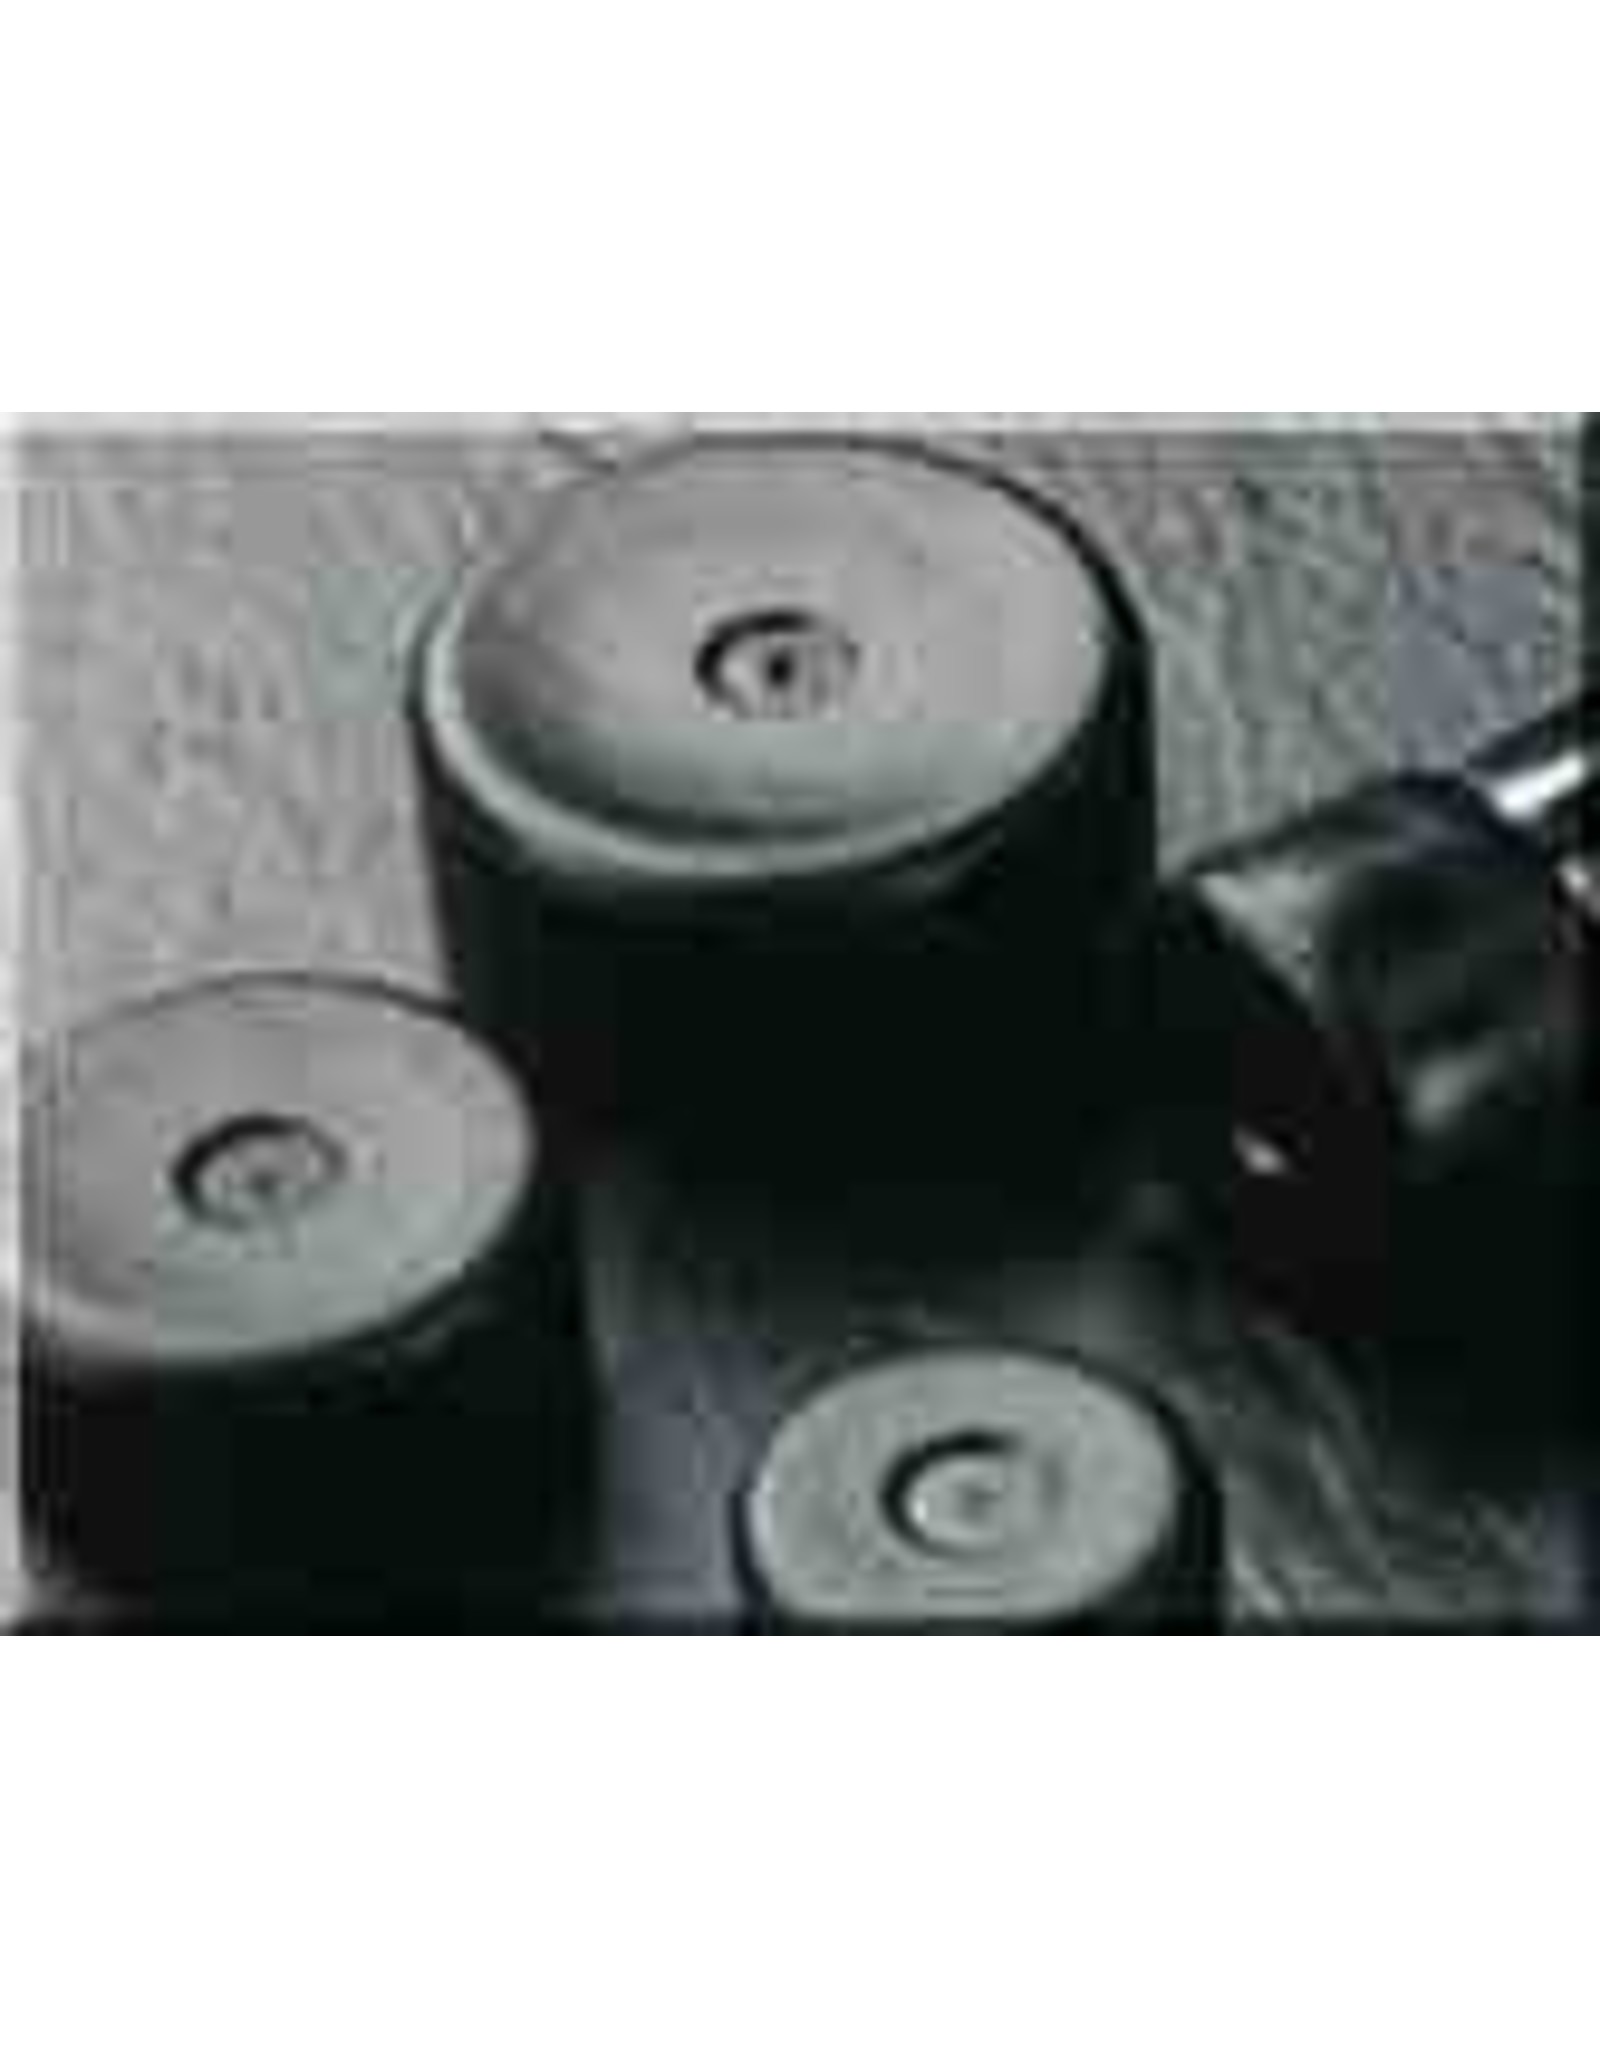 Eyepiece Rear Cap 2 Inch (Pack of 2)